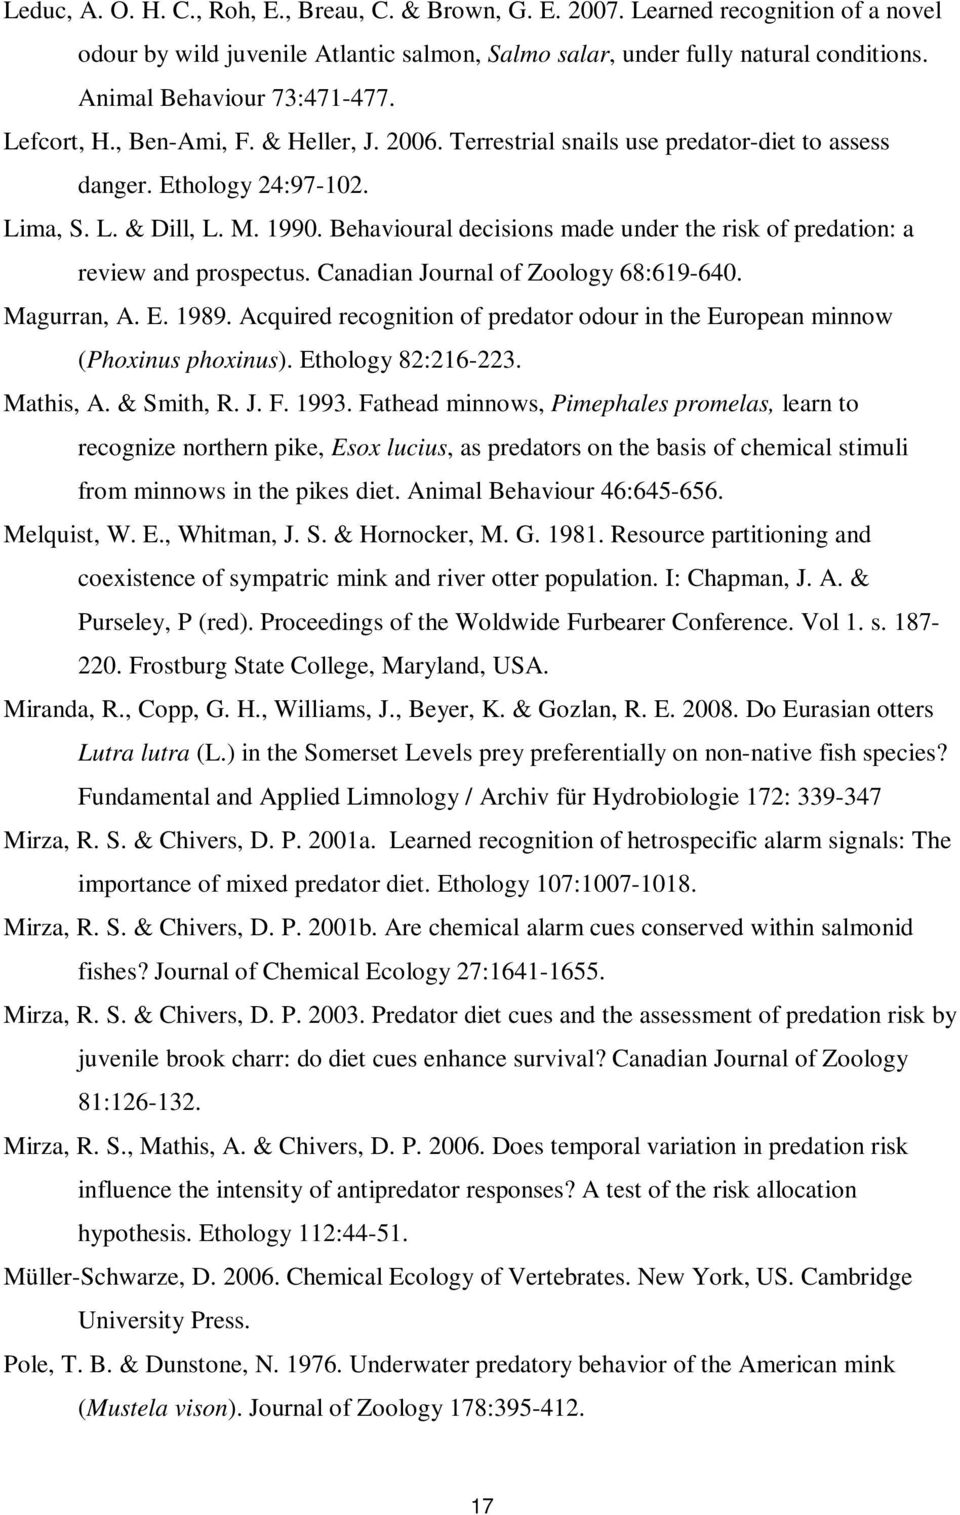 Behavioural decisions made under the risk of predation: a review and prospectus. Canadian Journal of Zoology 68:619-640. Magurran, A. E. 1989.